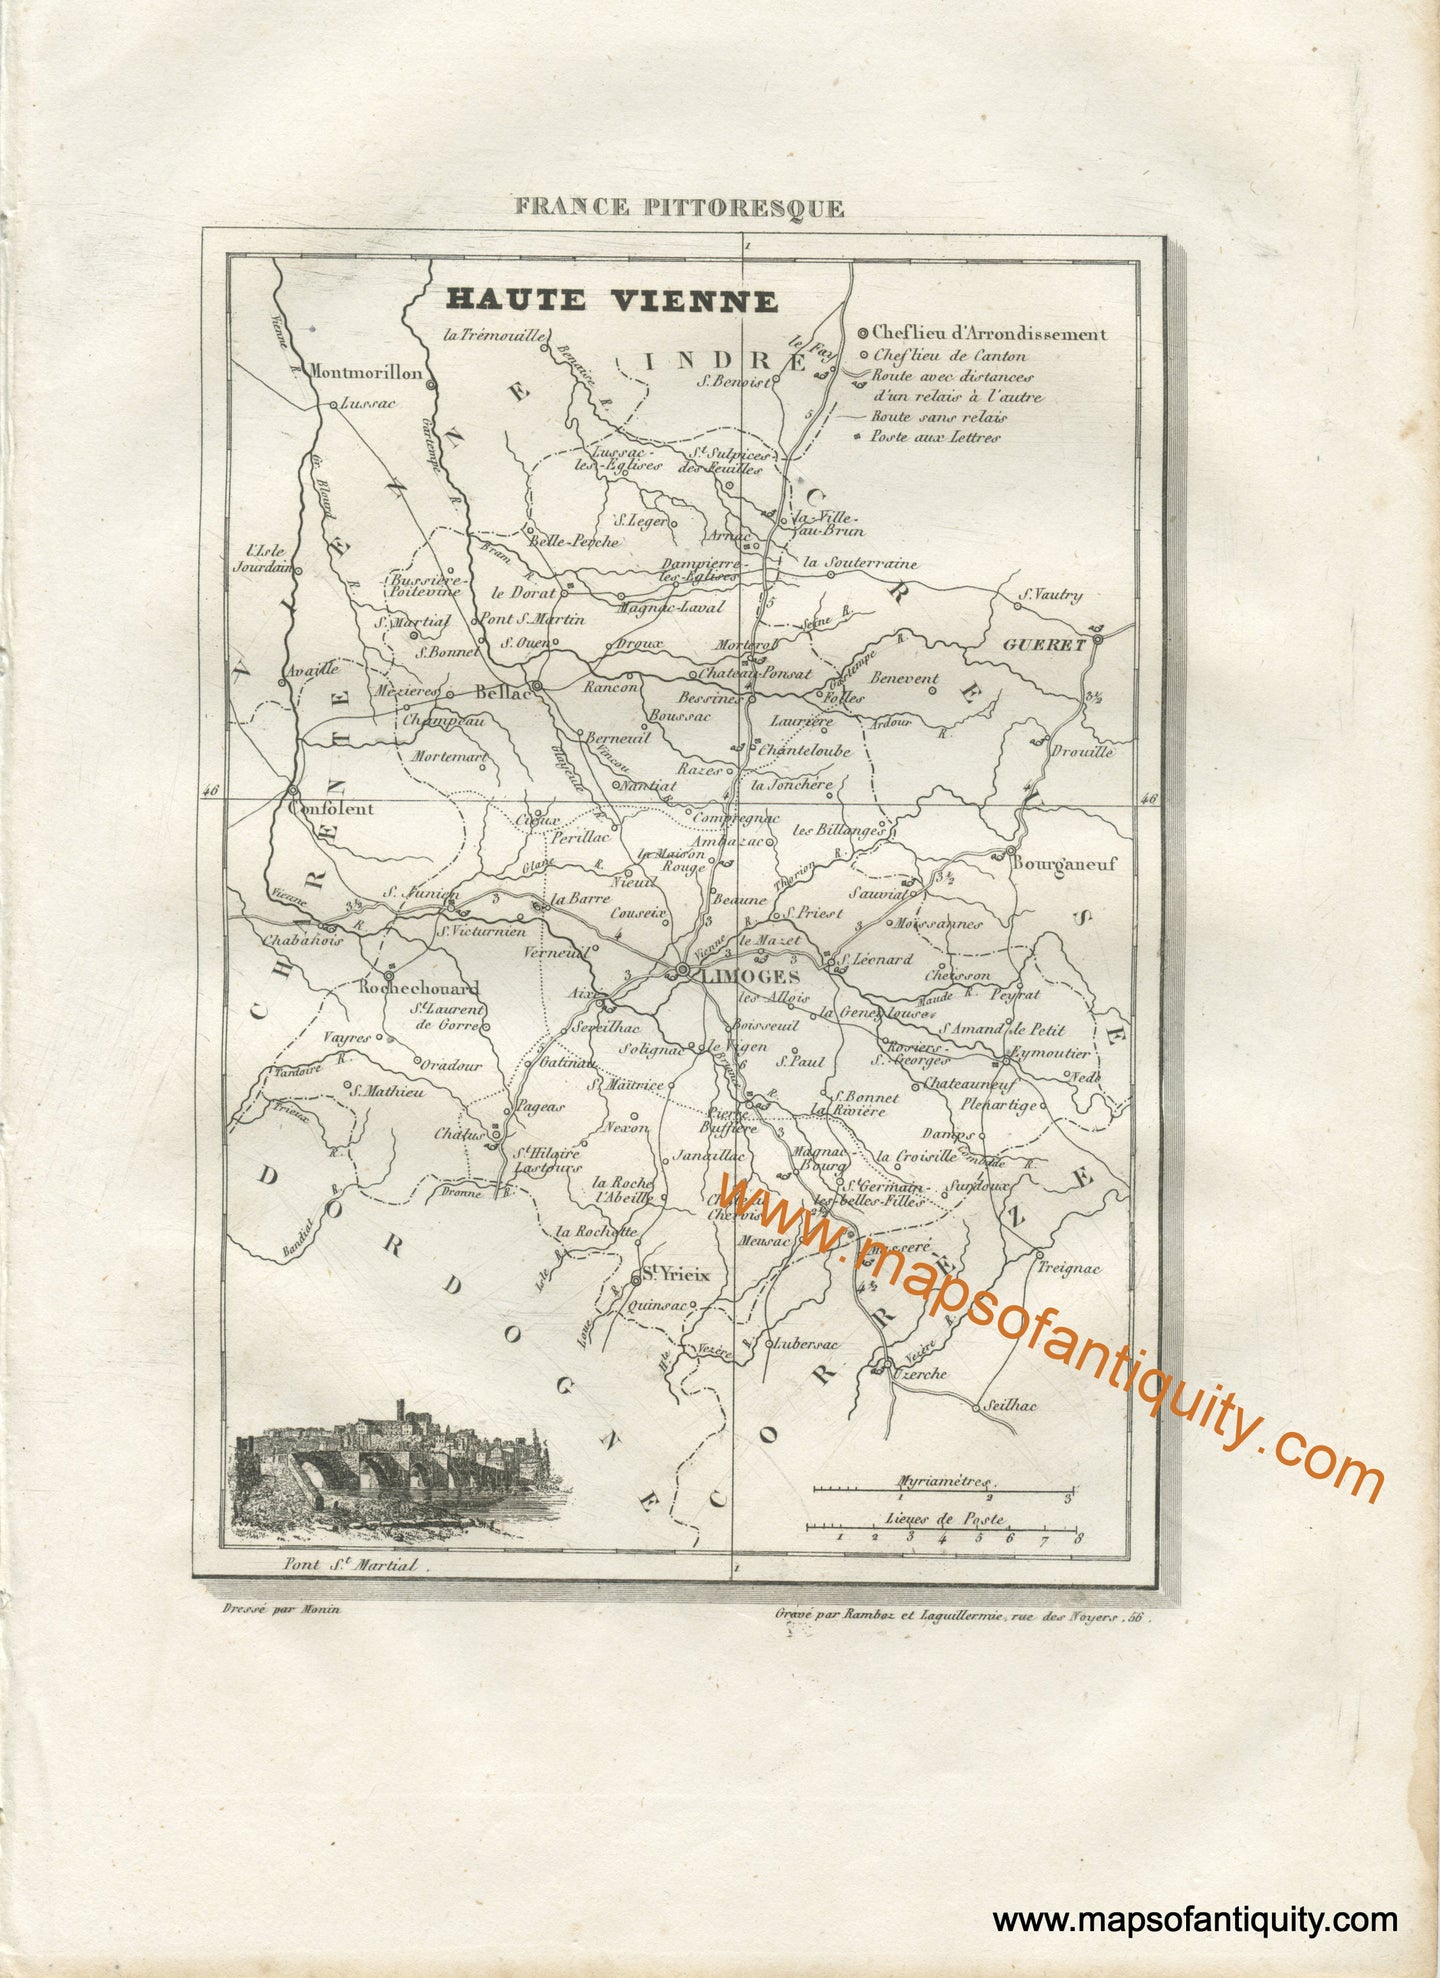 Antique-Black-and-White-Map-France-Haute-Vienne-including-the-cities-of-Gueret-St-Yrieix-and-Limoges-Europe-France-1835-Monin-Maps-Of-Antiquity